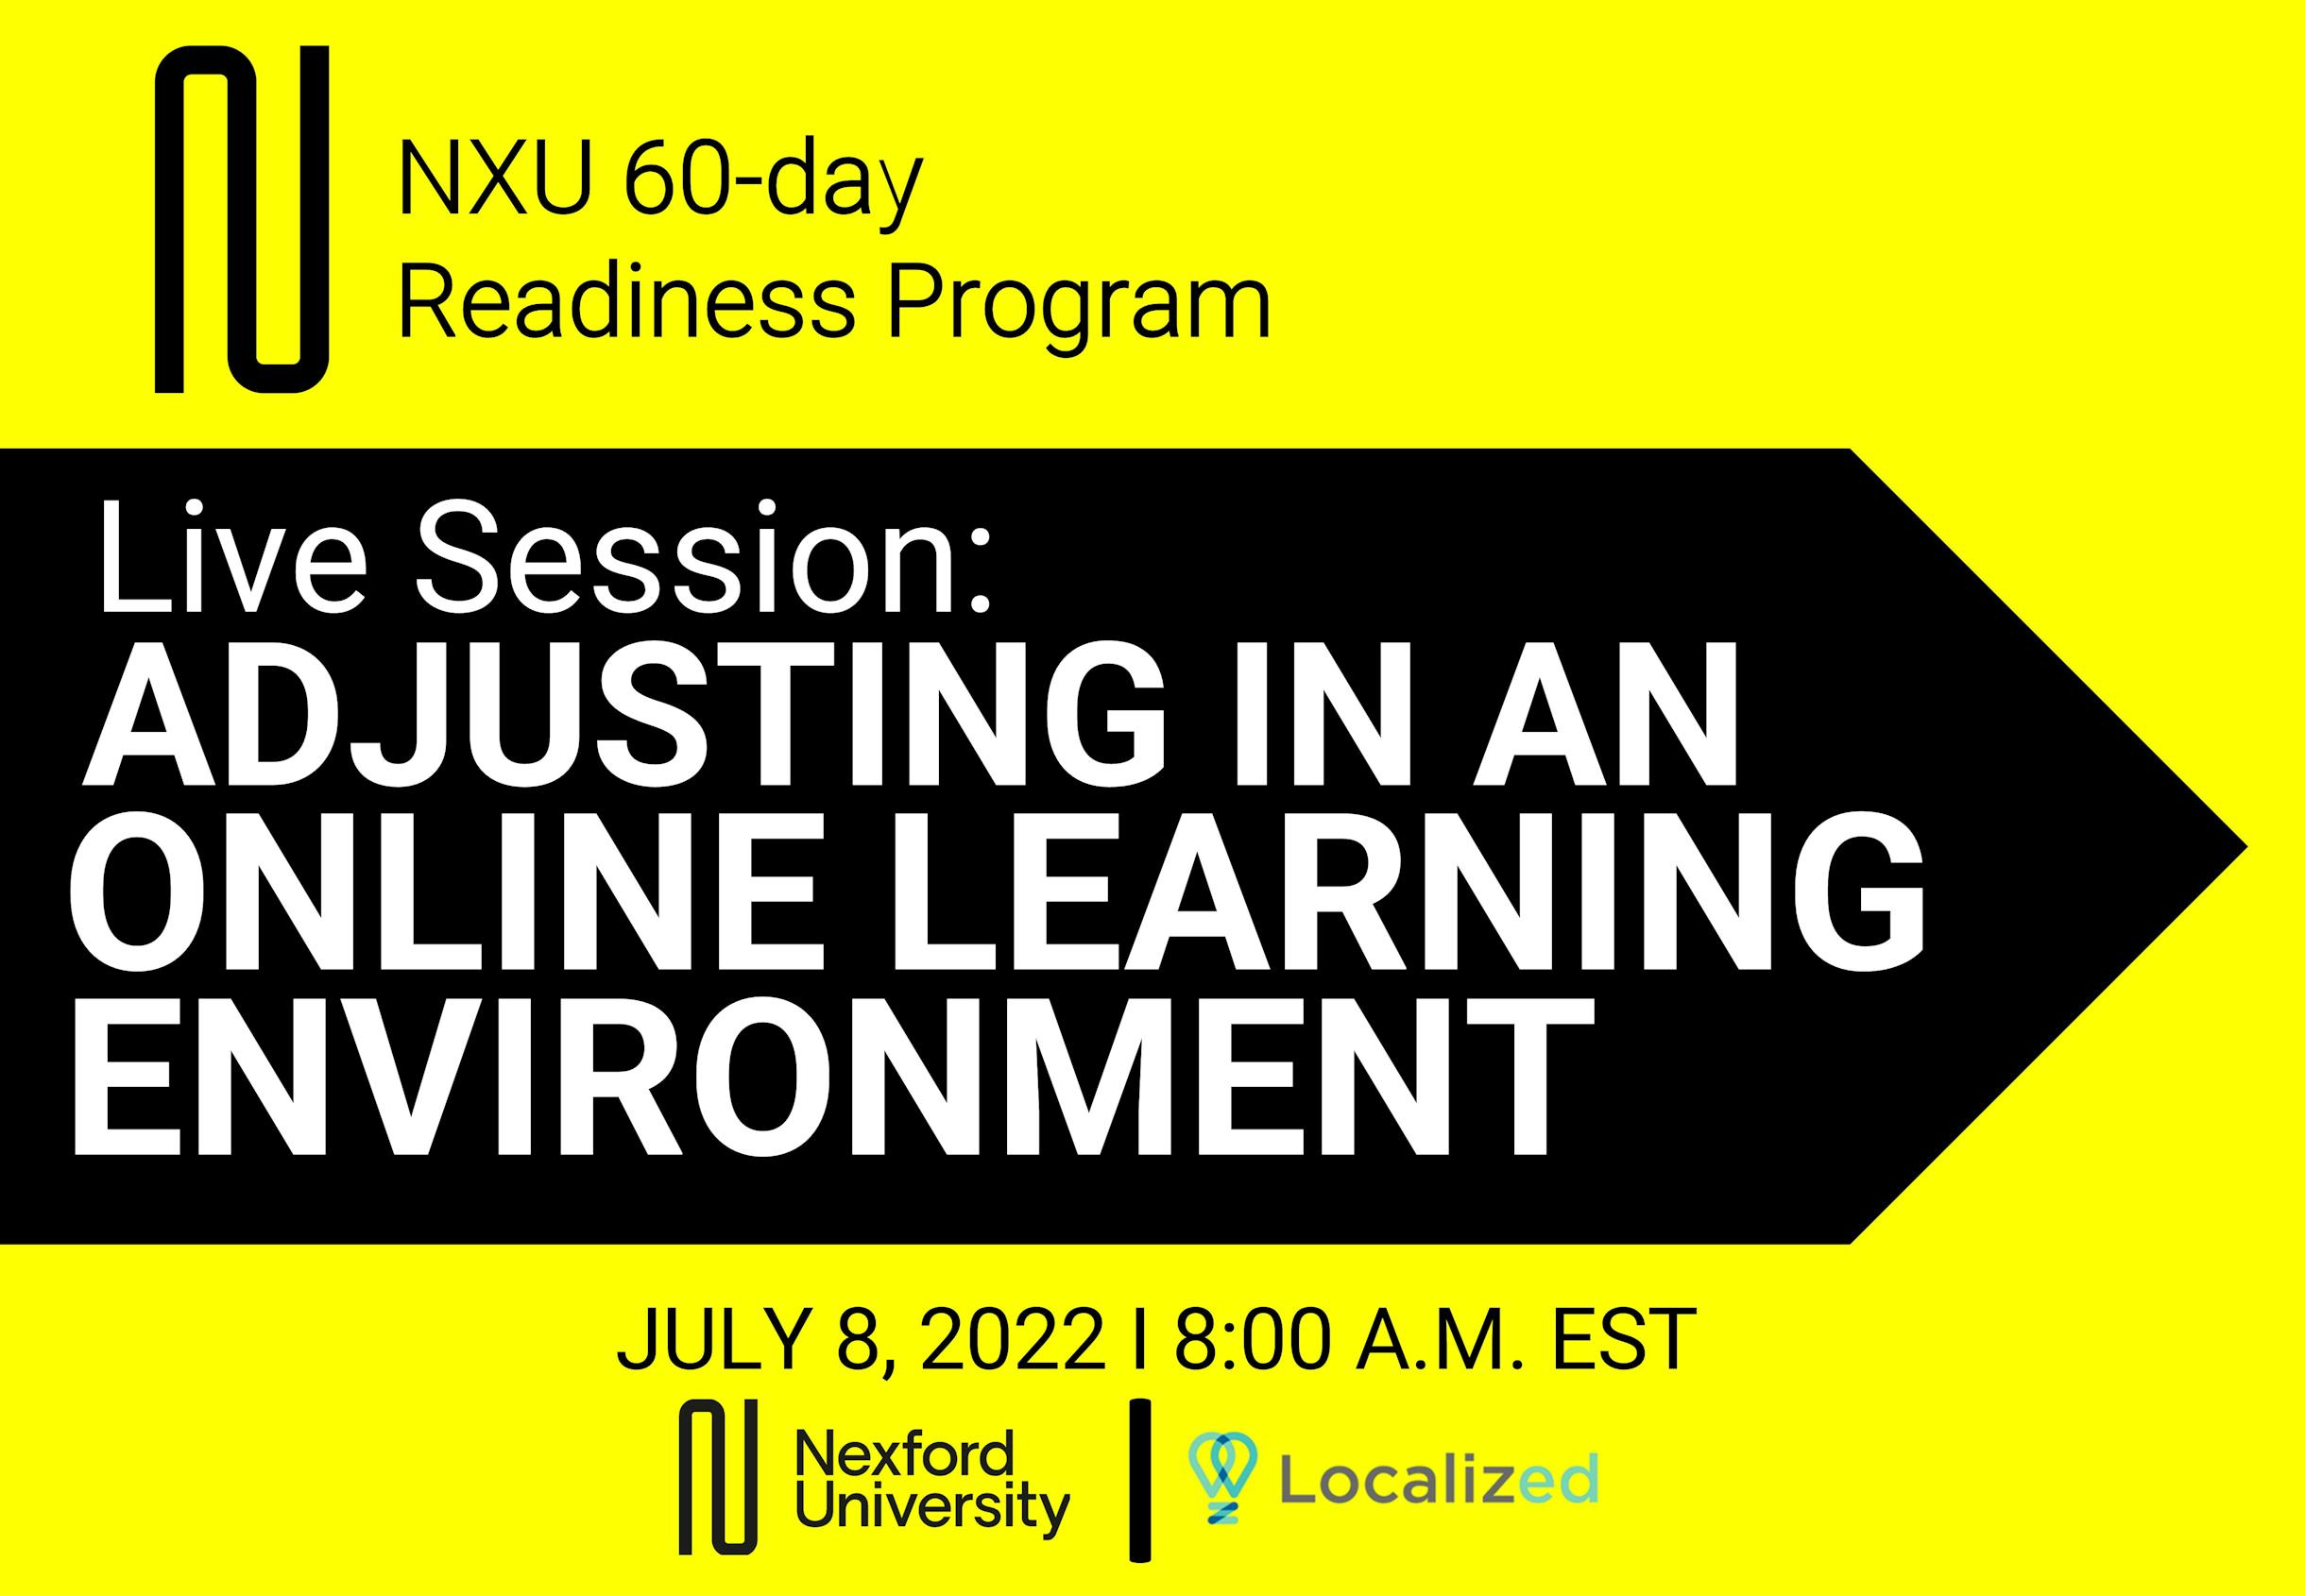 Live Session: Adjusting in an Online Learning Environment